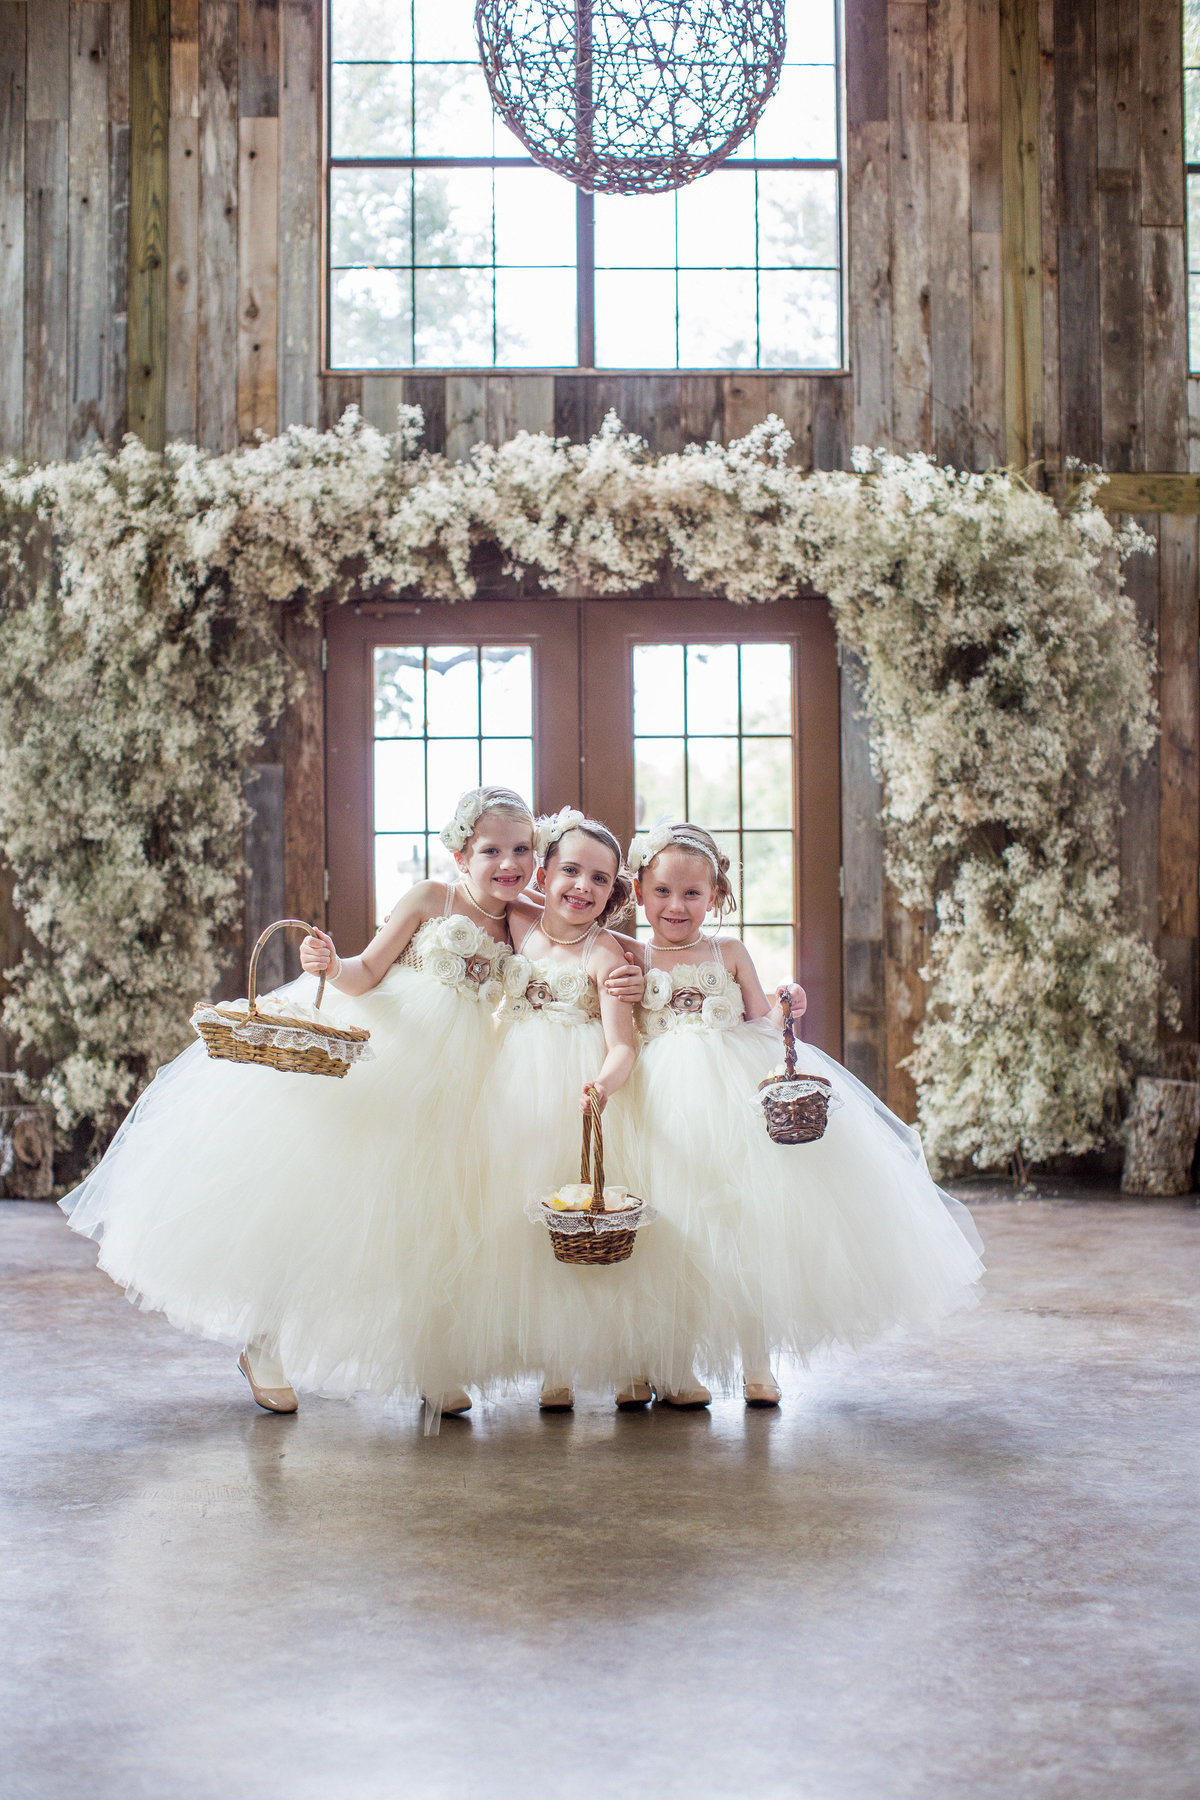 flower girls pose for portrait before wedding ceremony in Texas Hill Country wedding at Vista West Ranch